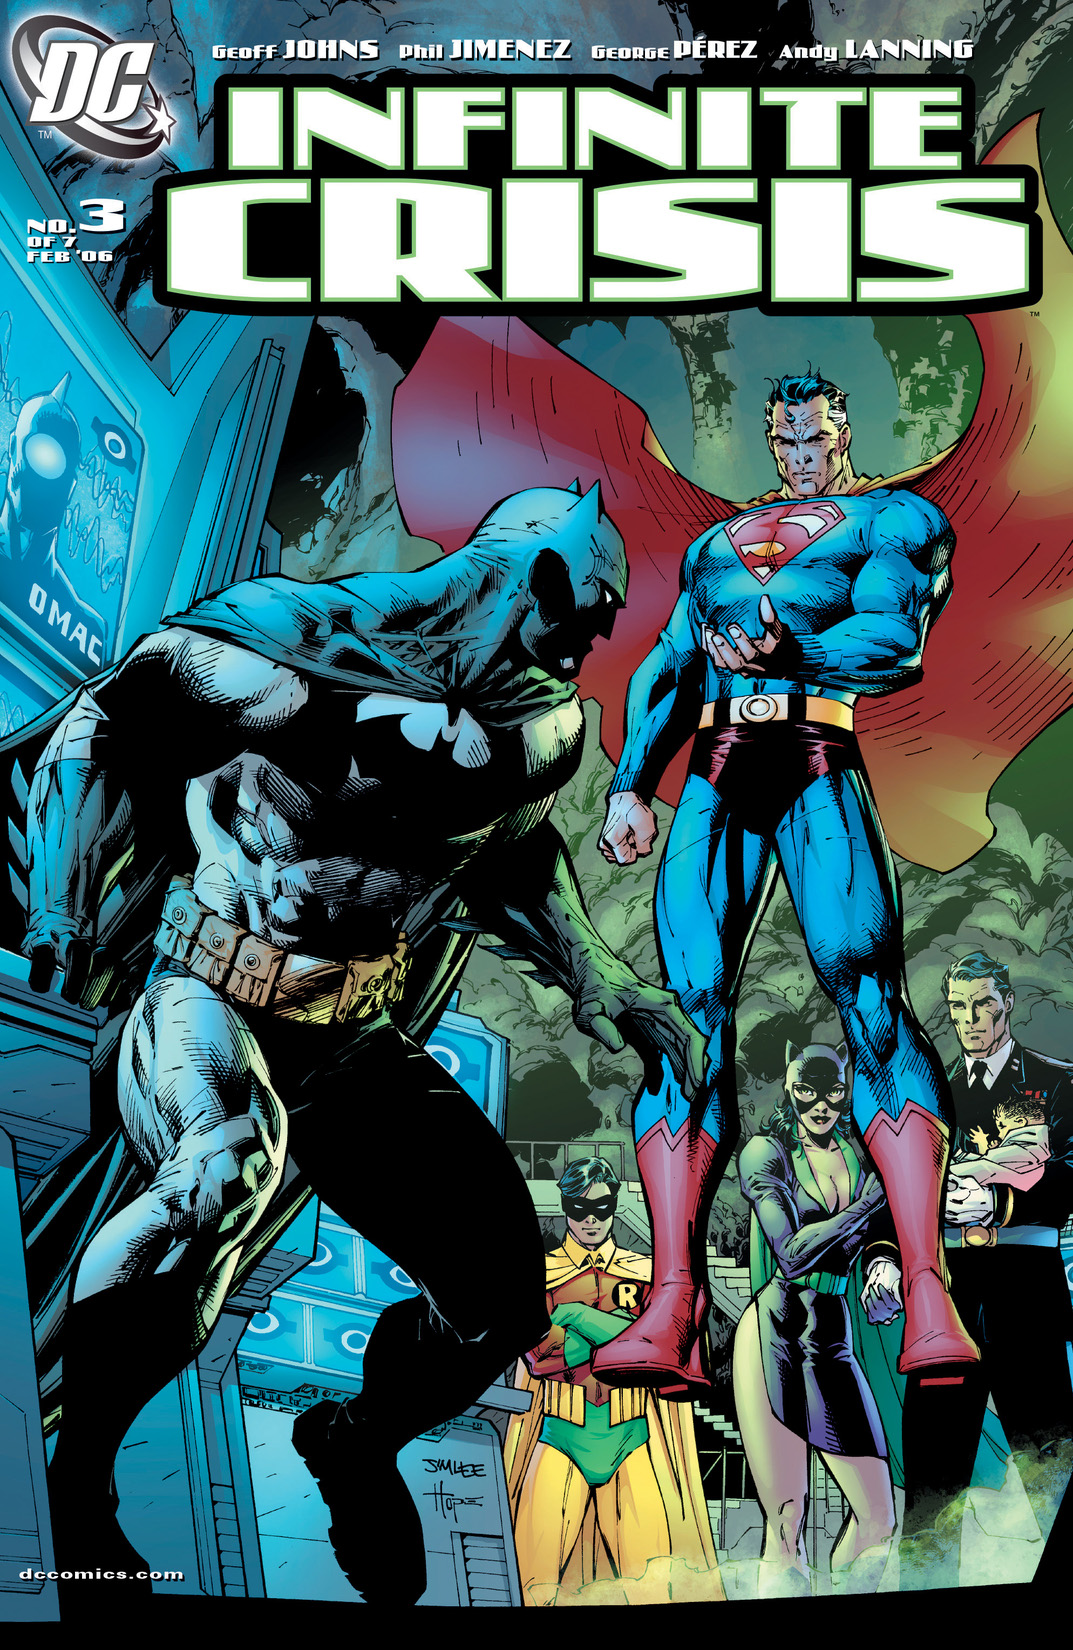 Infinite Crisis #3 preview images